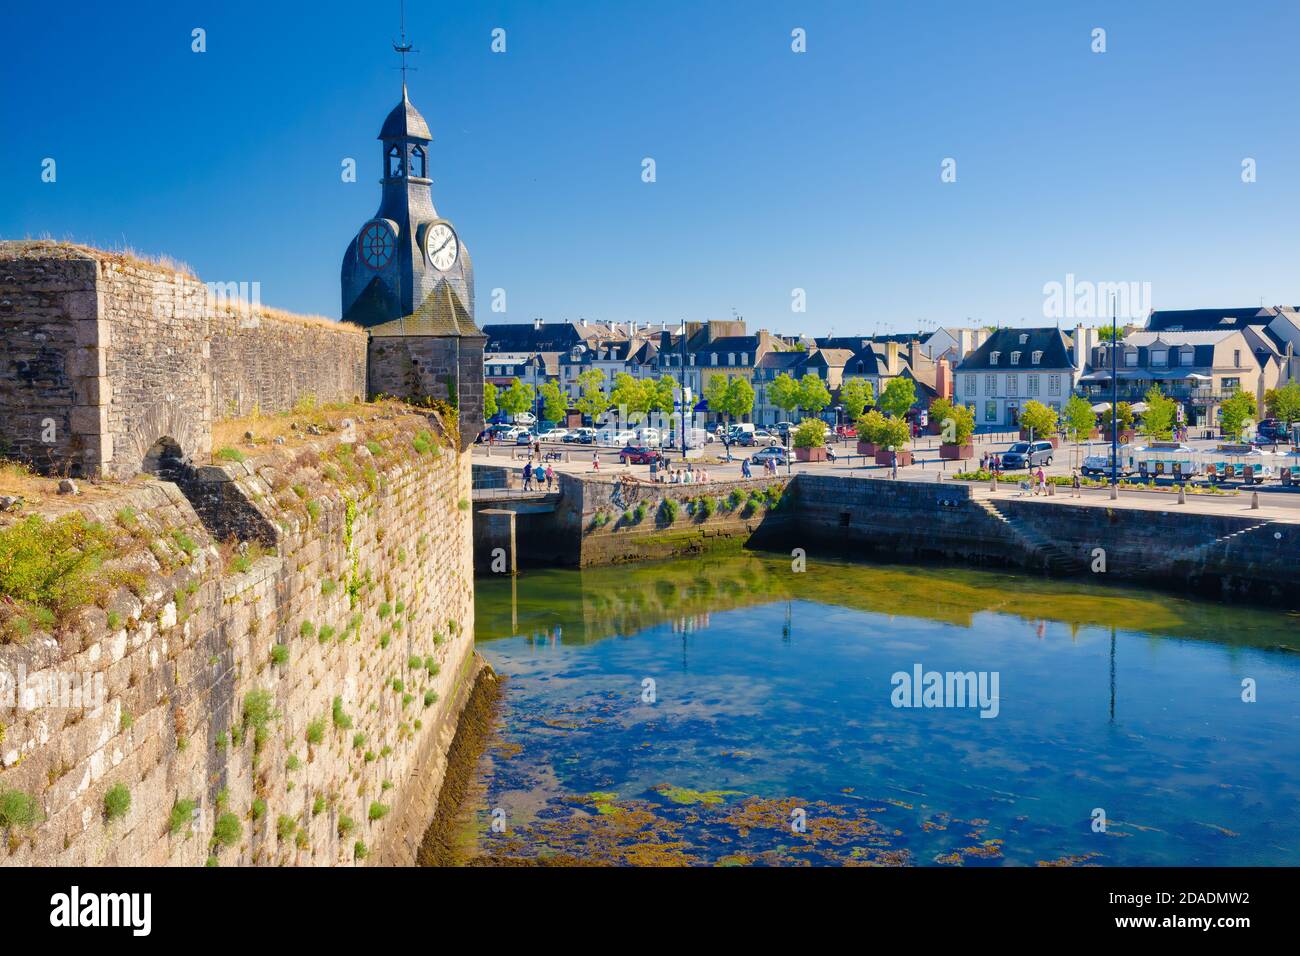 CONCARNEAU, BRITTANY, FRANCE: View of the port of Concarneau from the walls of the walled reconstruction. Stock Photo